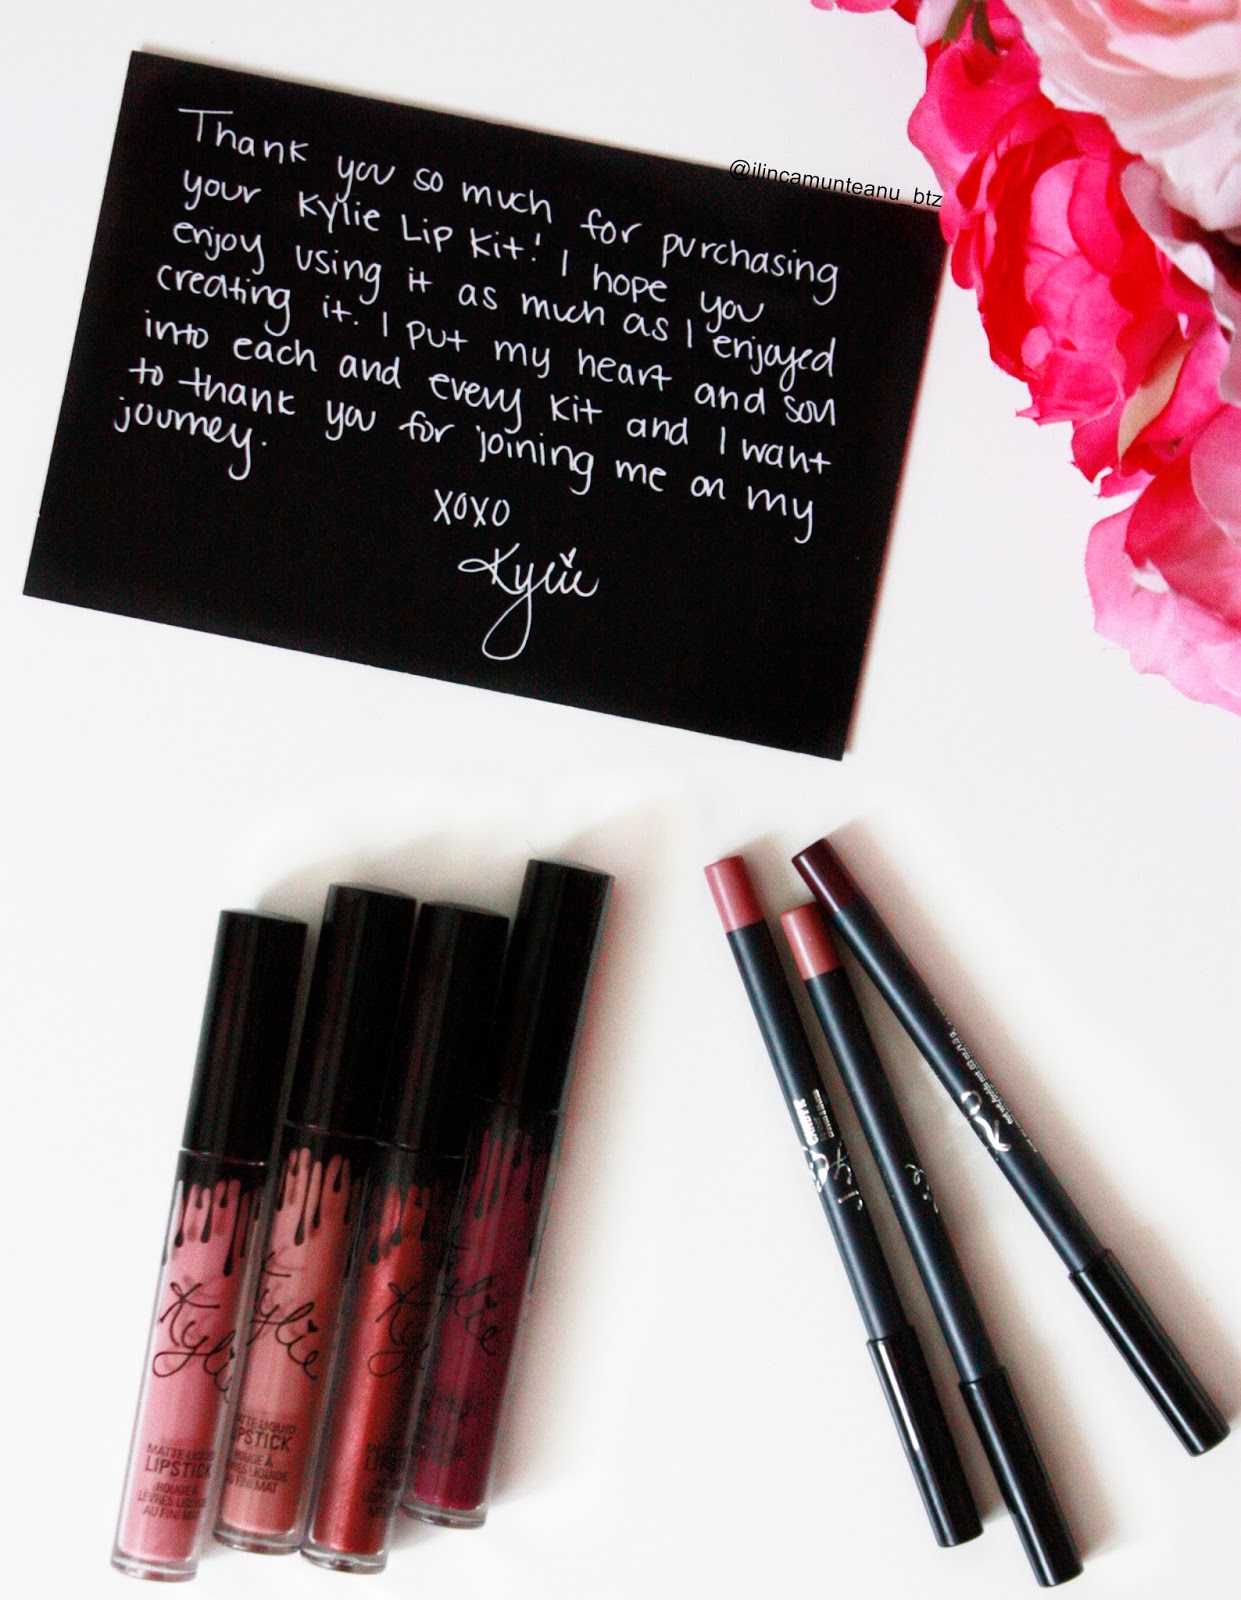 bus instinct calf I L I N C A M U N T E A N U B L O G •: • REVIEW • THE KYLIE LIP KIT℠  [UPDATED]